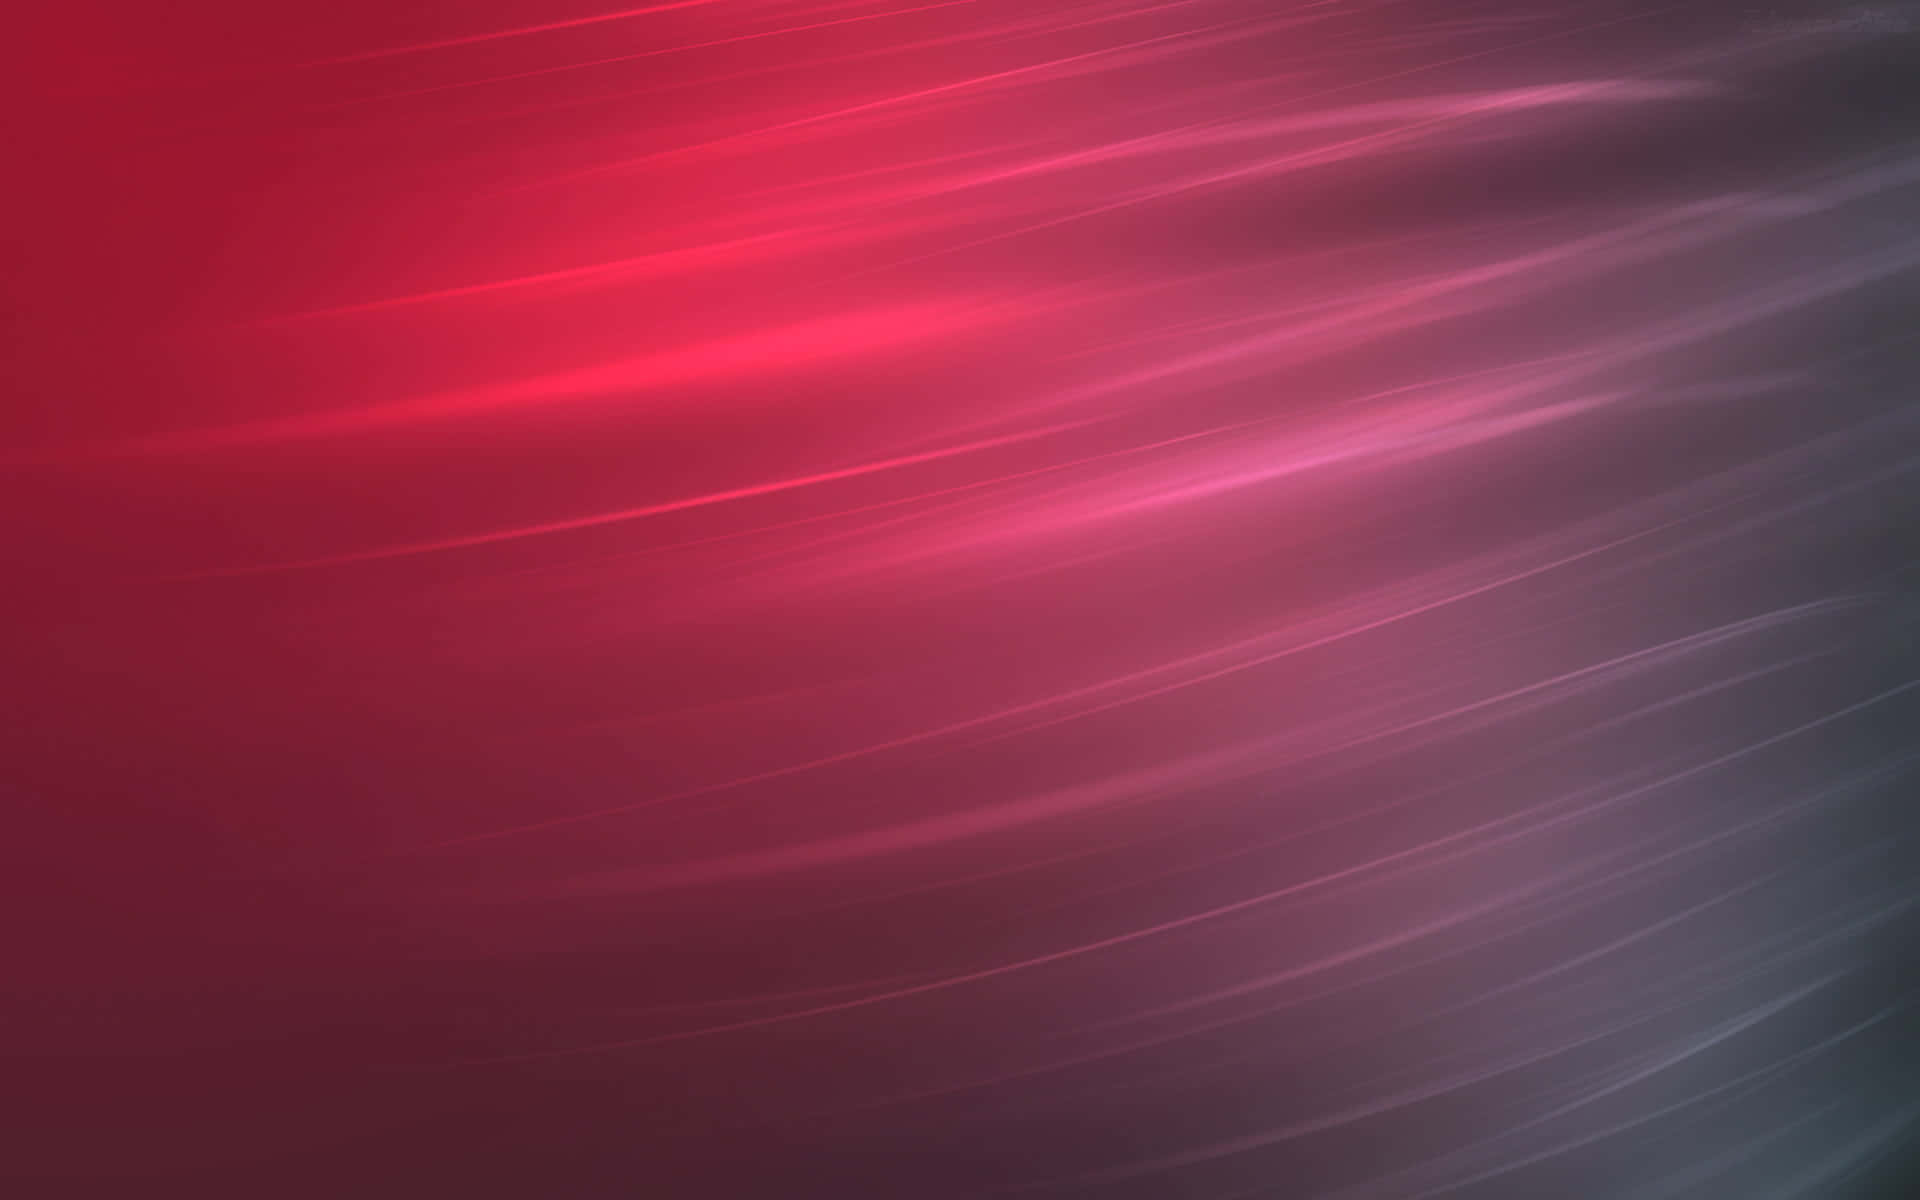 A Red And Black Abstract Background With Wavy Lines